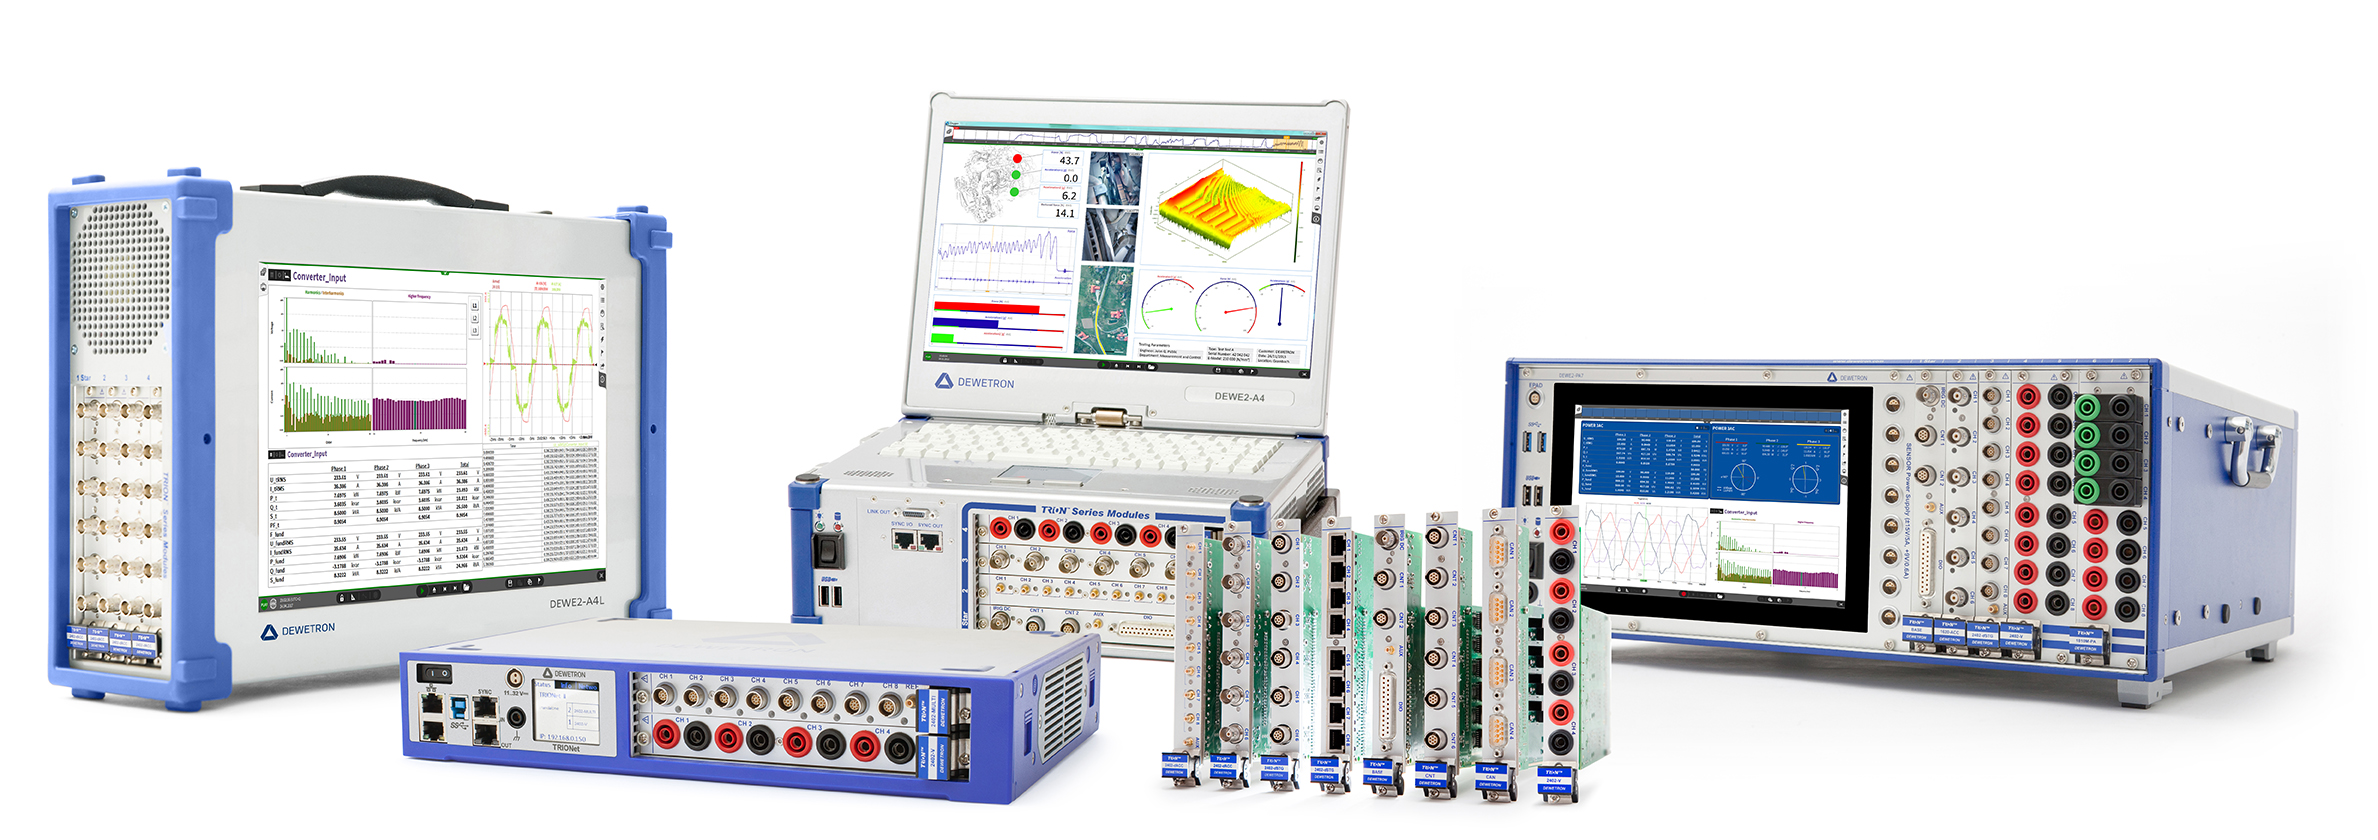 DEWETRON Power Analyzer and Data Acquisition Product Line featuring OXYGEN Software